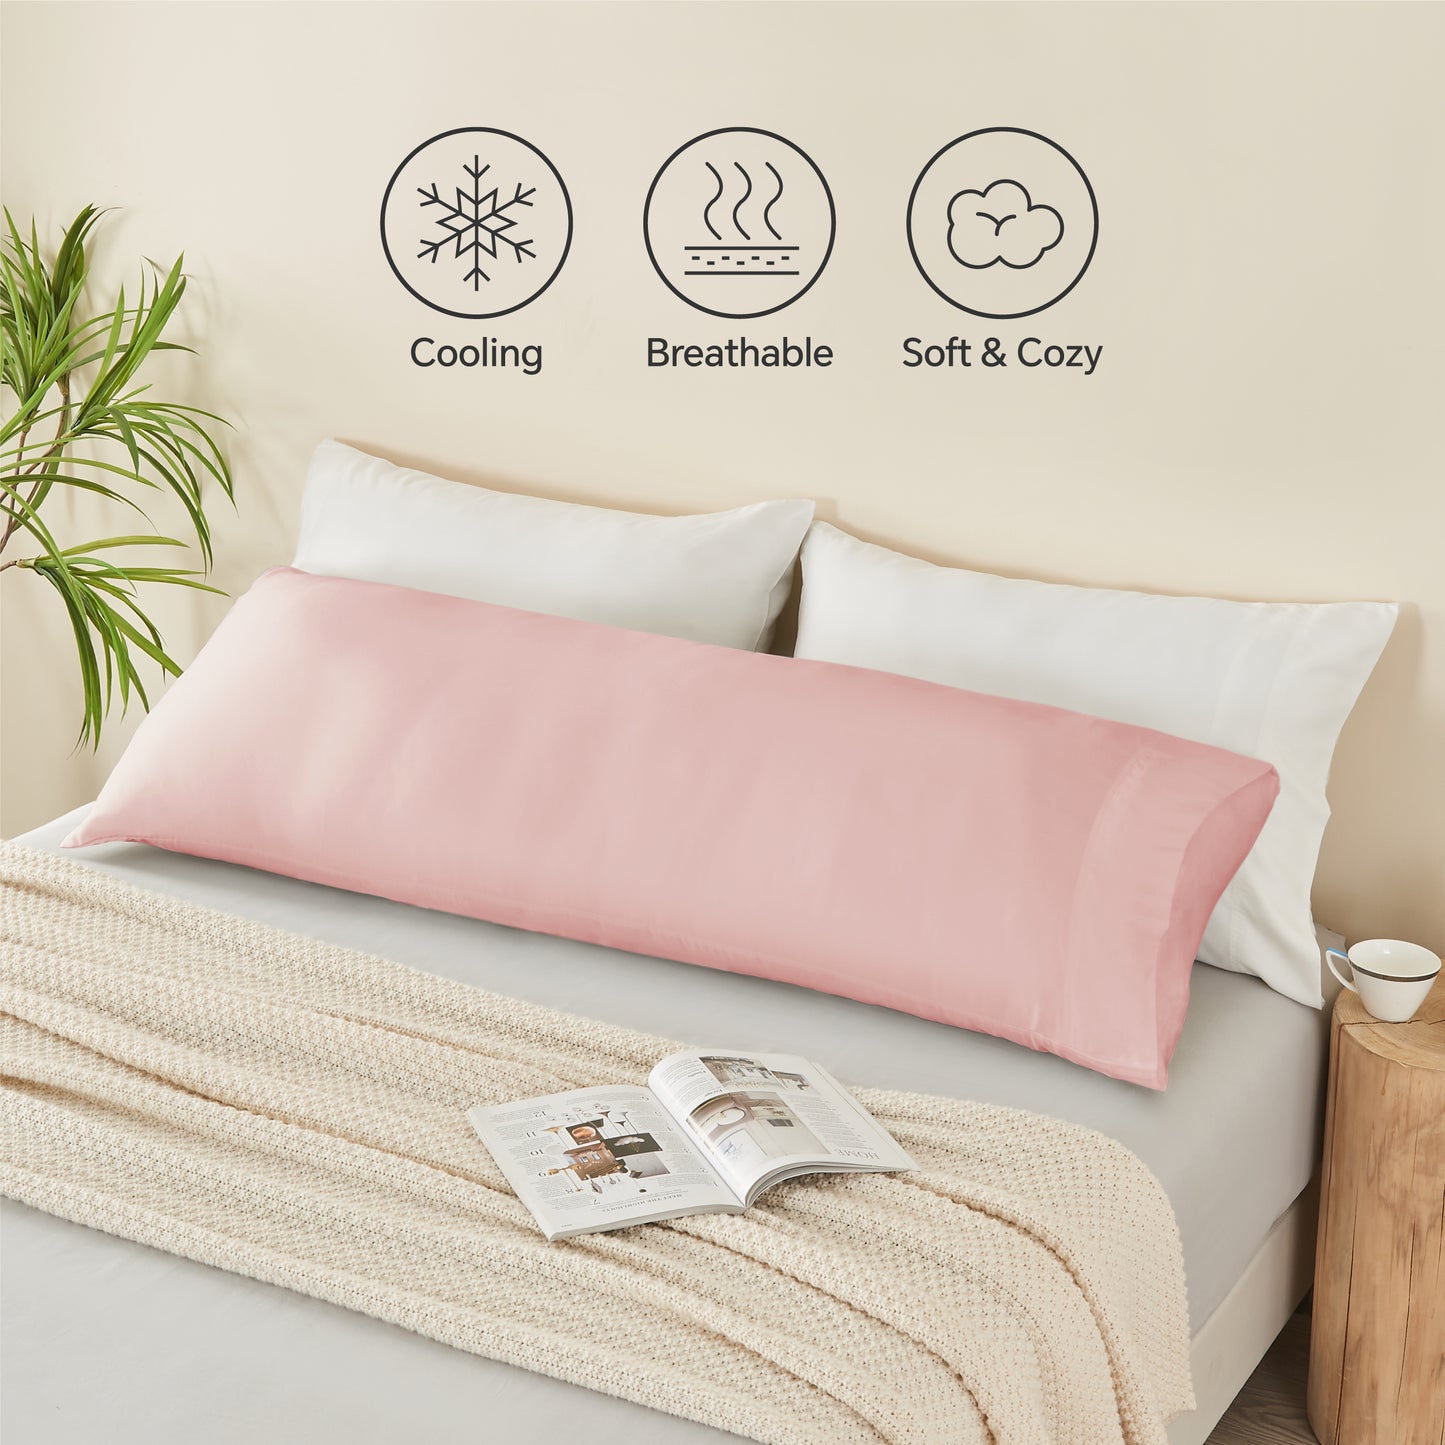 Pillow Cases Set of 2 Pack, Rayon Derived from Bamboo, Cooling Pillow Cases for Hot Sleepers & Night Sweats, Breathable and Silky Soft Envelope Pillowcases